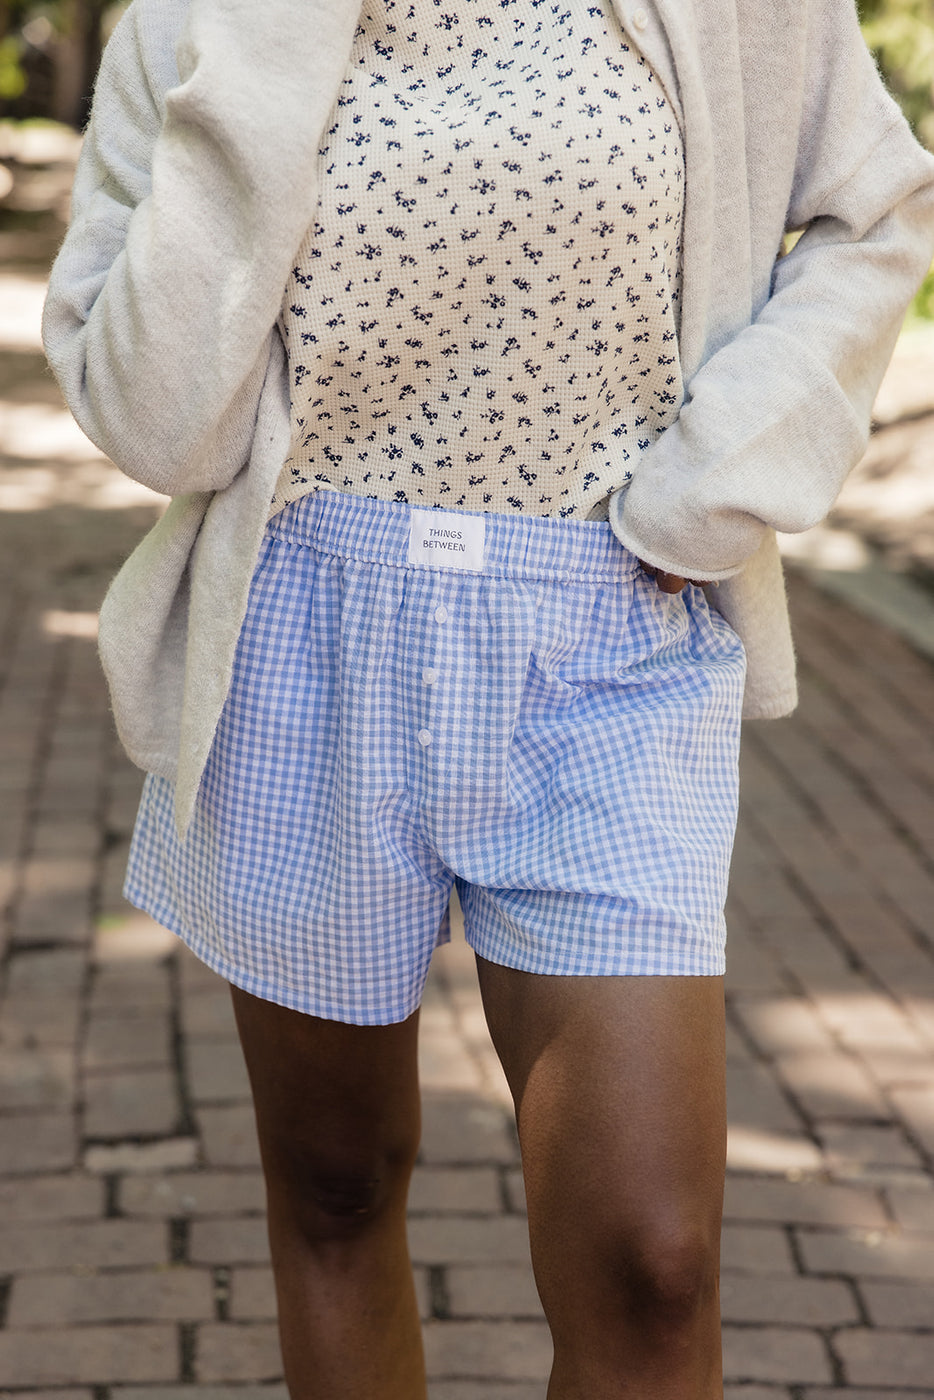 a person wearing a pair of blue and white checkered shorts